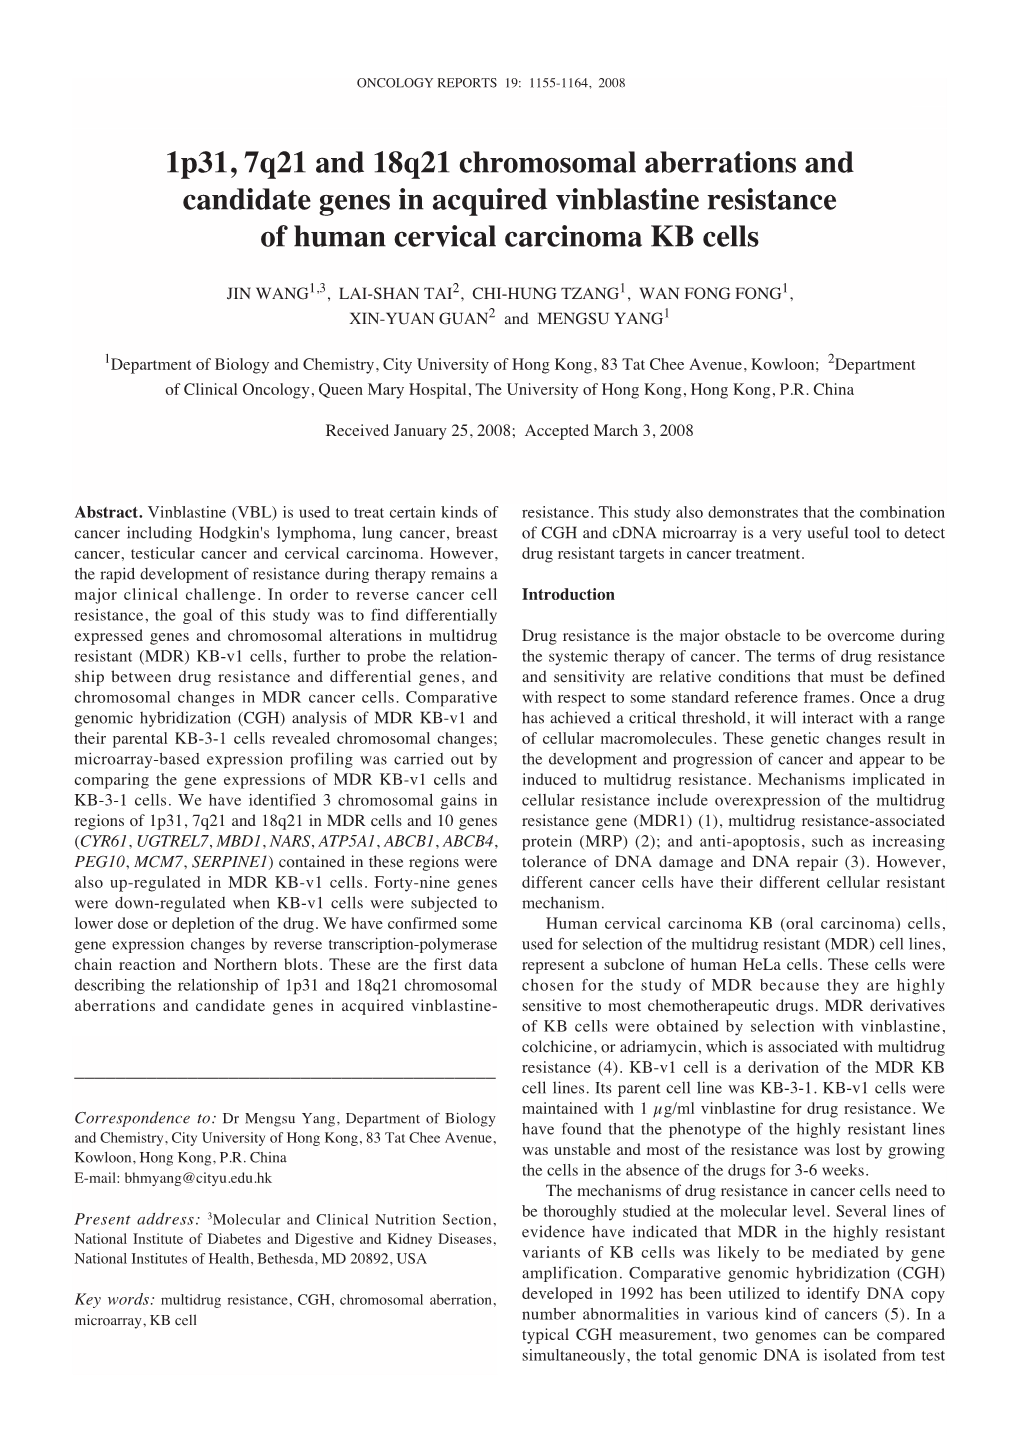 1P31, 7Q21 and 18Q21 Chromosomal Aberrations and Candidate Genes in Acquired Vinblastine Resistance of Human Cervical Carcinoma KB Cells